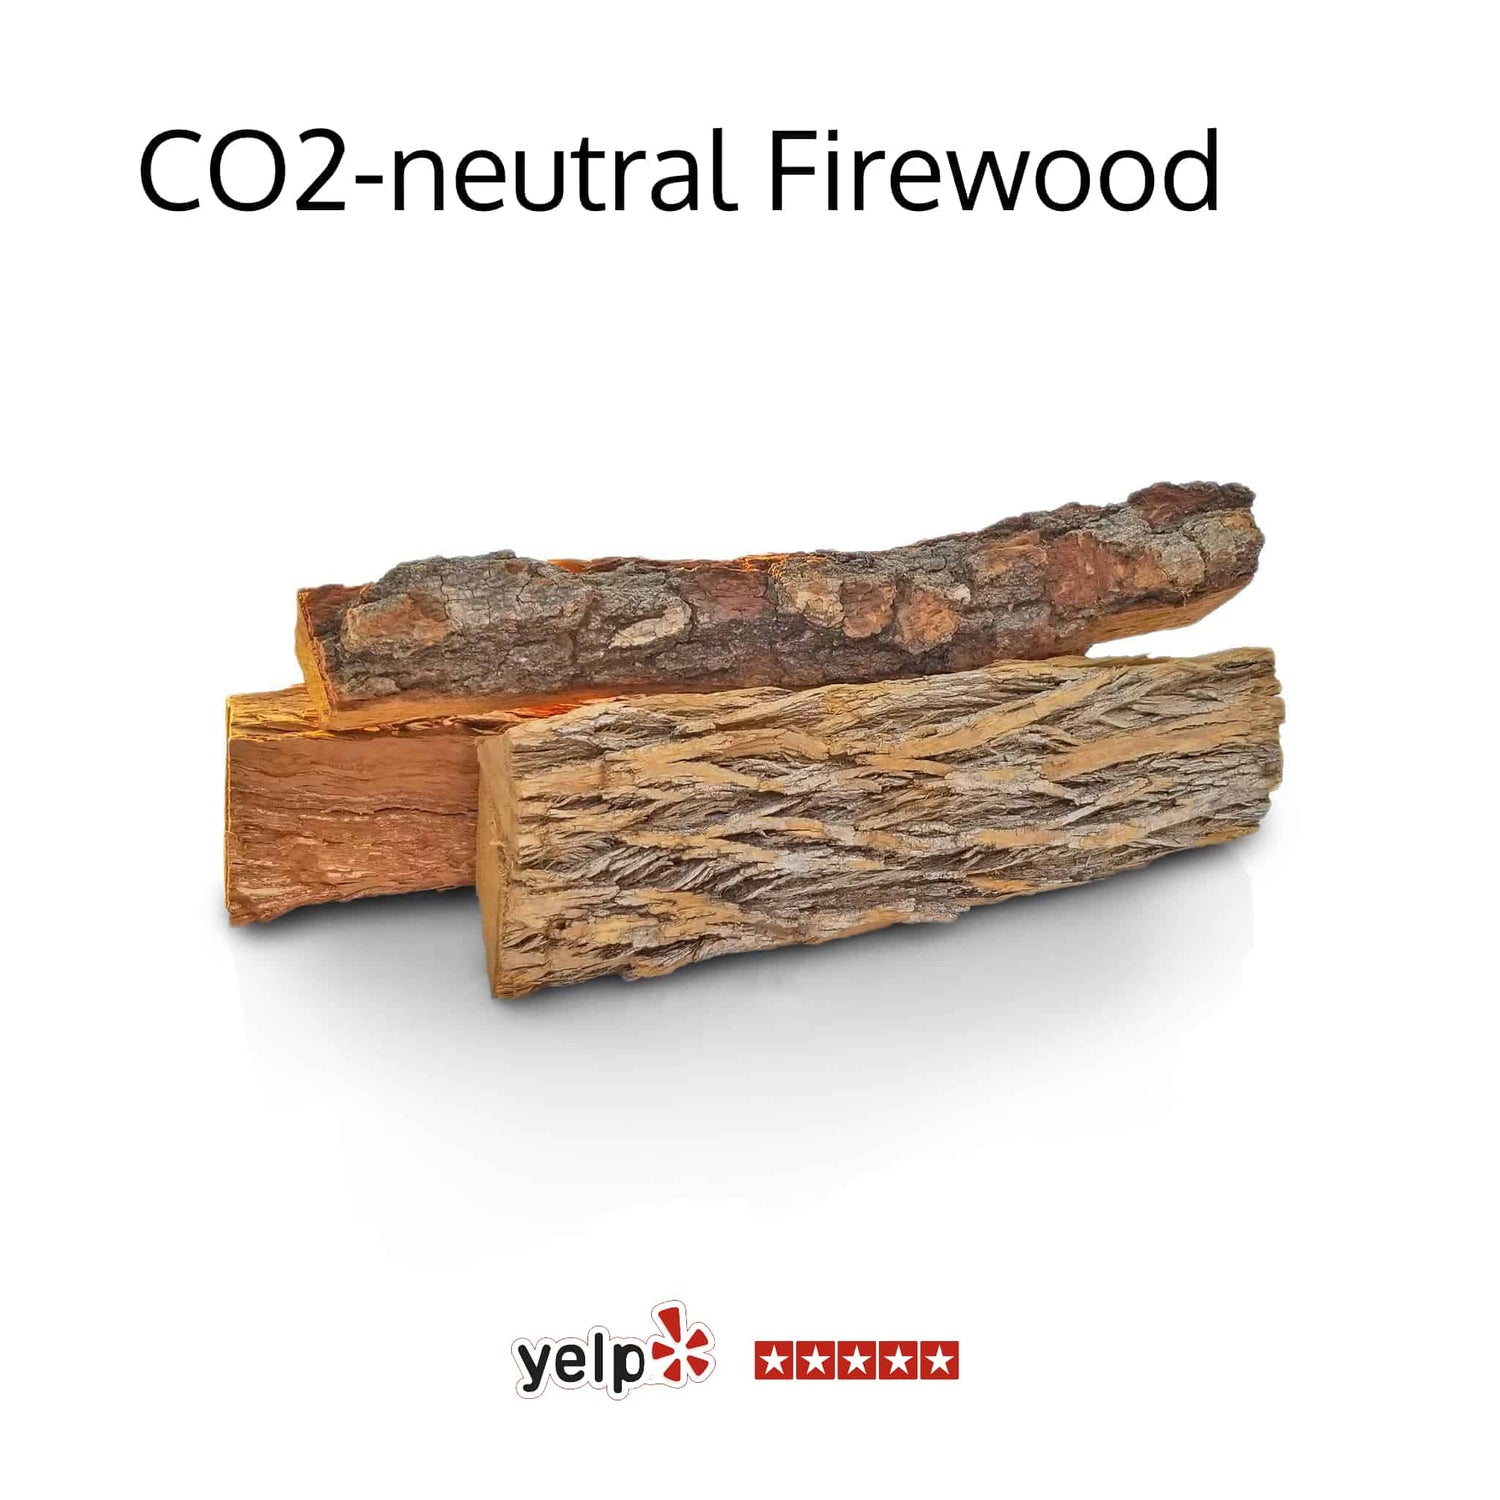 All our firewood is climate-neutral, CO2-neutral, carbon-neutral. And really well seasoned - guaranteed!